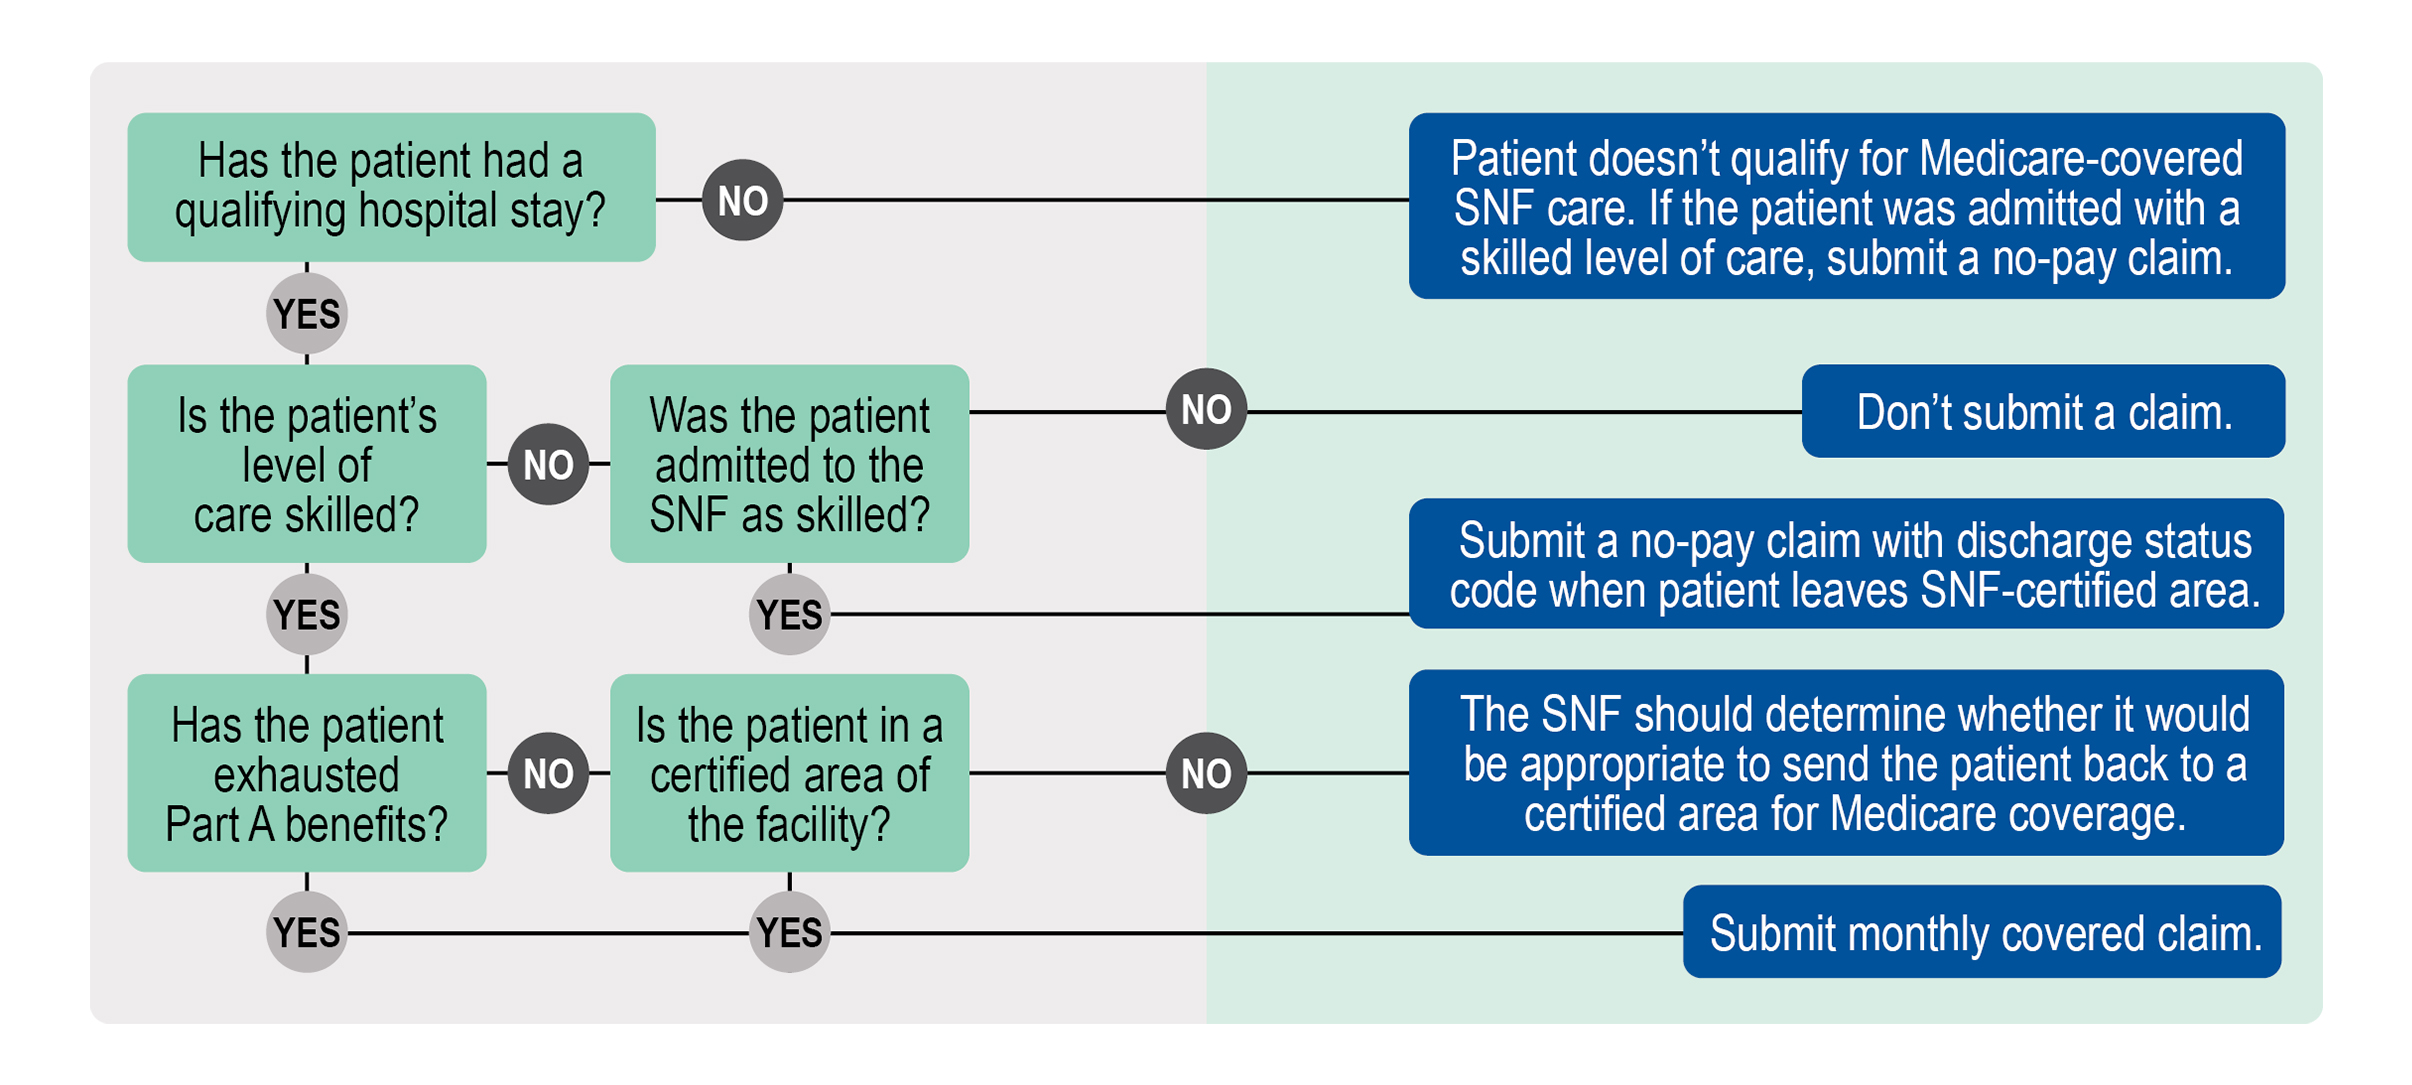 This is a complex flow chart intended to help you understand the Summary of SNF Coverage and Billing. For an explanation of the chart, contact your Medicare Administrative Contractor (MAC) Customer Service. For contact information, visit https://www.cms.gov/Research-Statistics-Data-and-Systems/Monitoring-Programs/Medicare-FFS-Compliance-Programs/Review-Contractor-Directory-Interactive-Map on the Centers for Medicare & Medicaid Services (CMS) website.